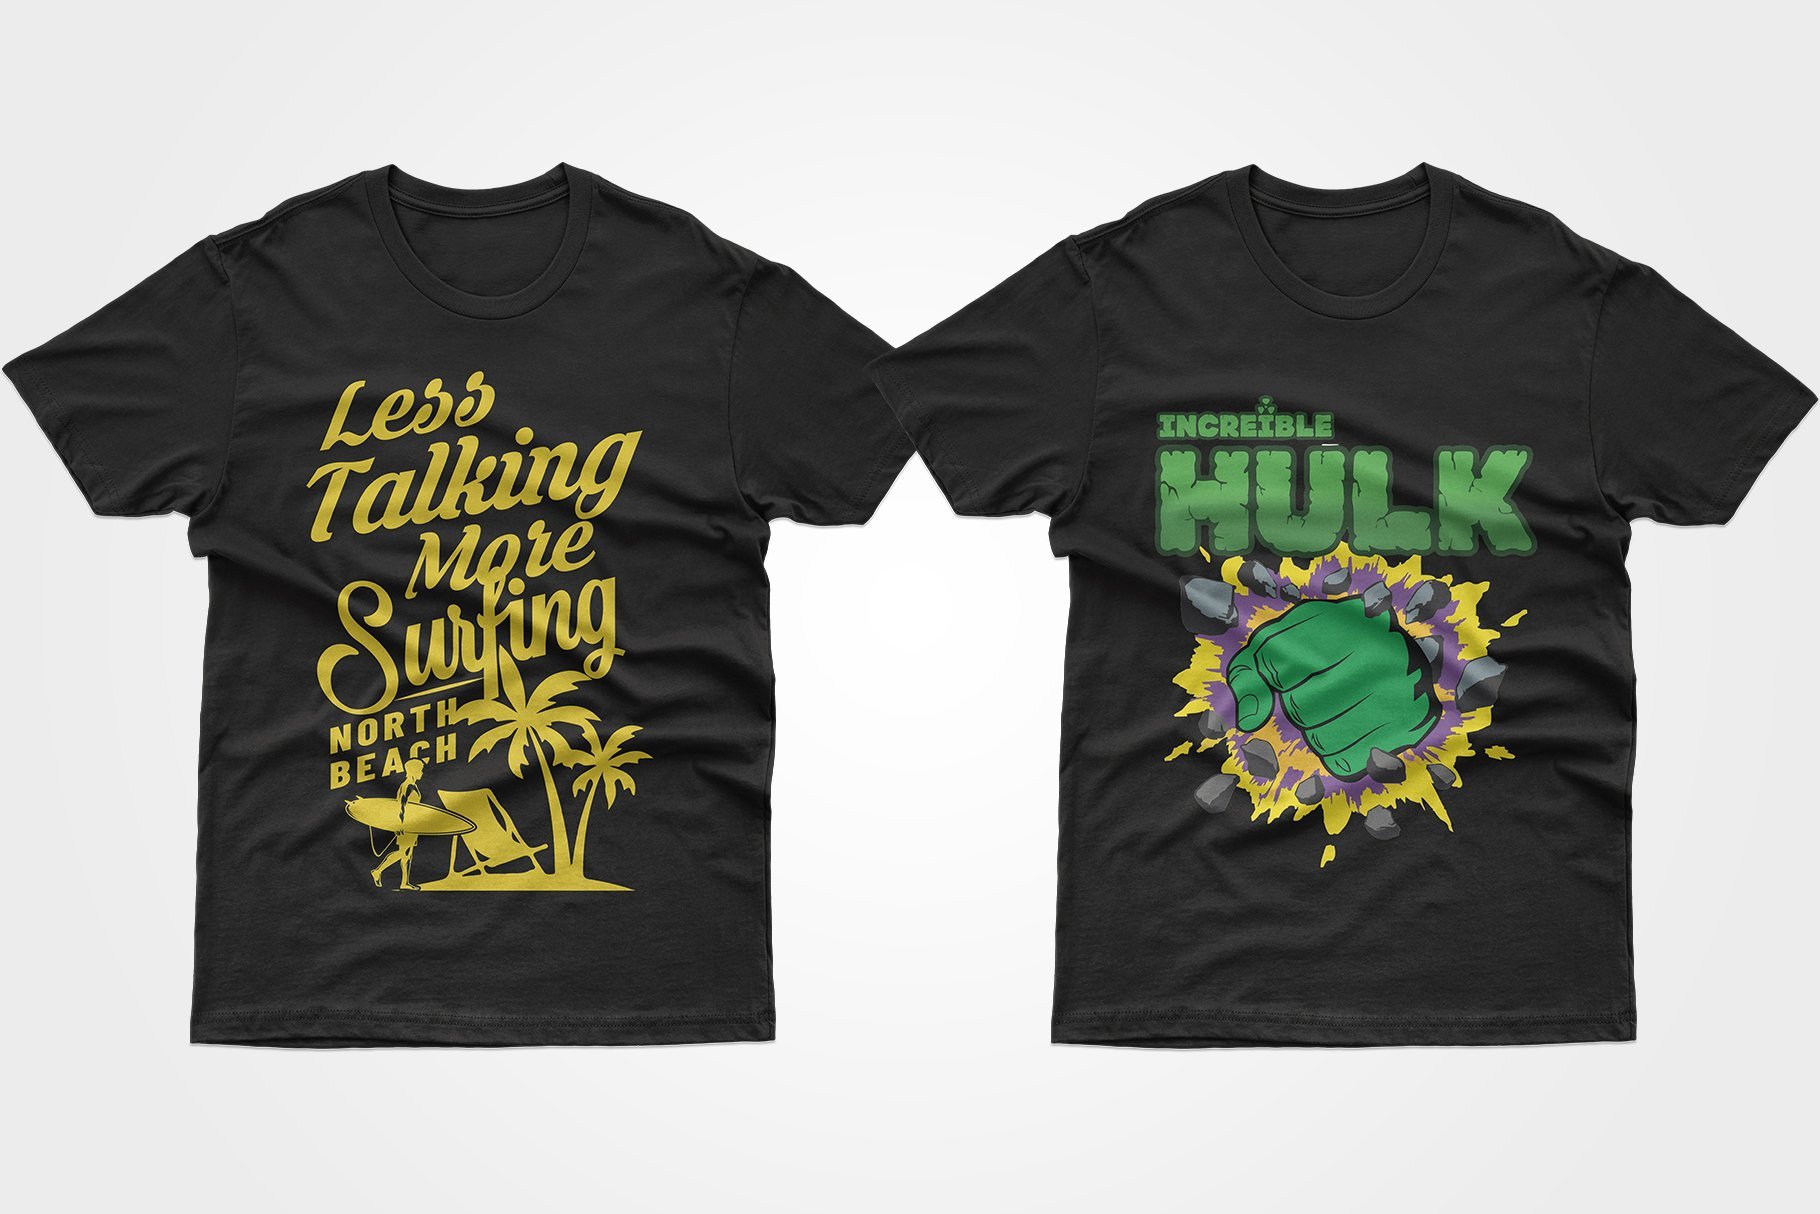 Two black T-shirts - with palm trees and a Hulk fist.